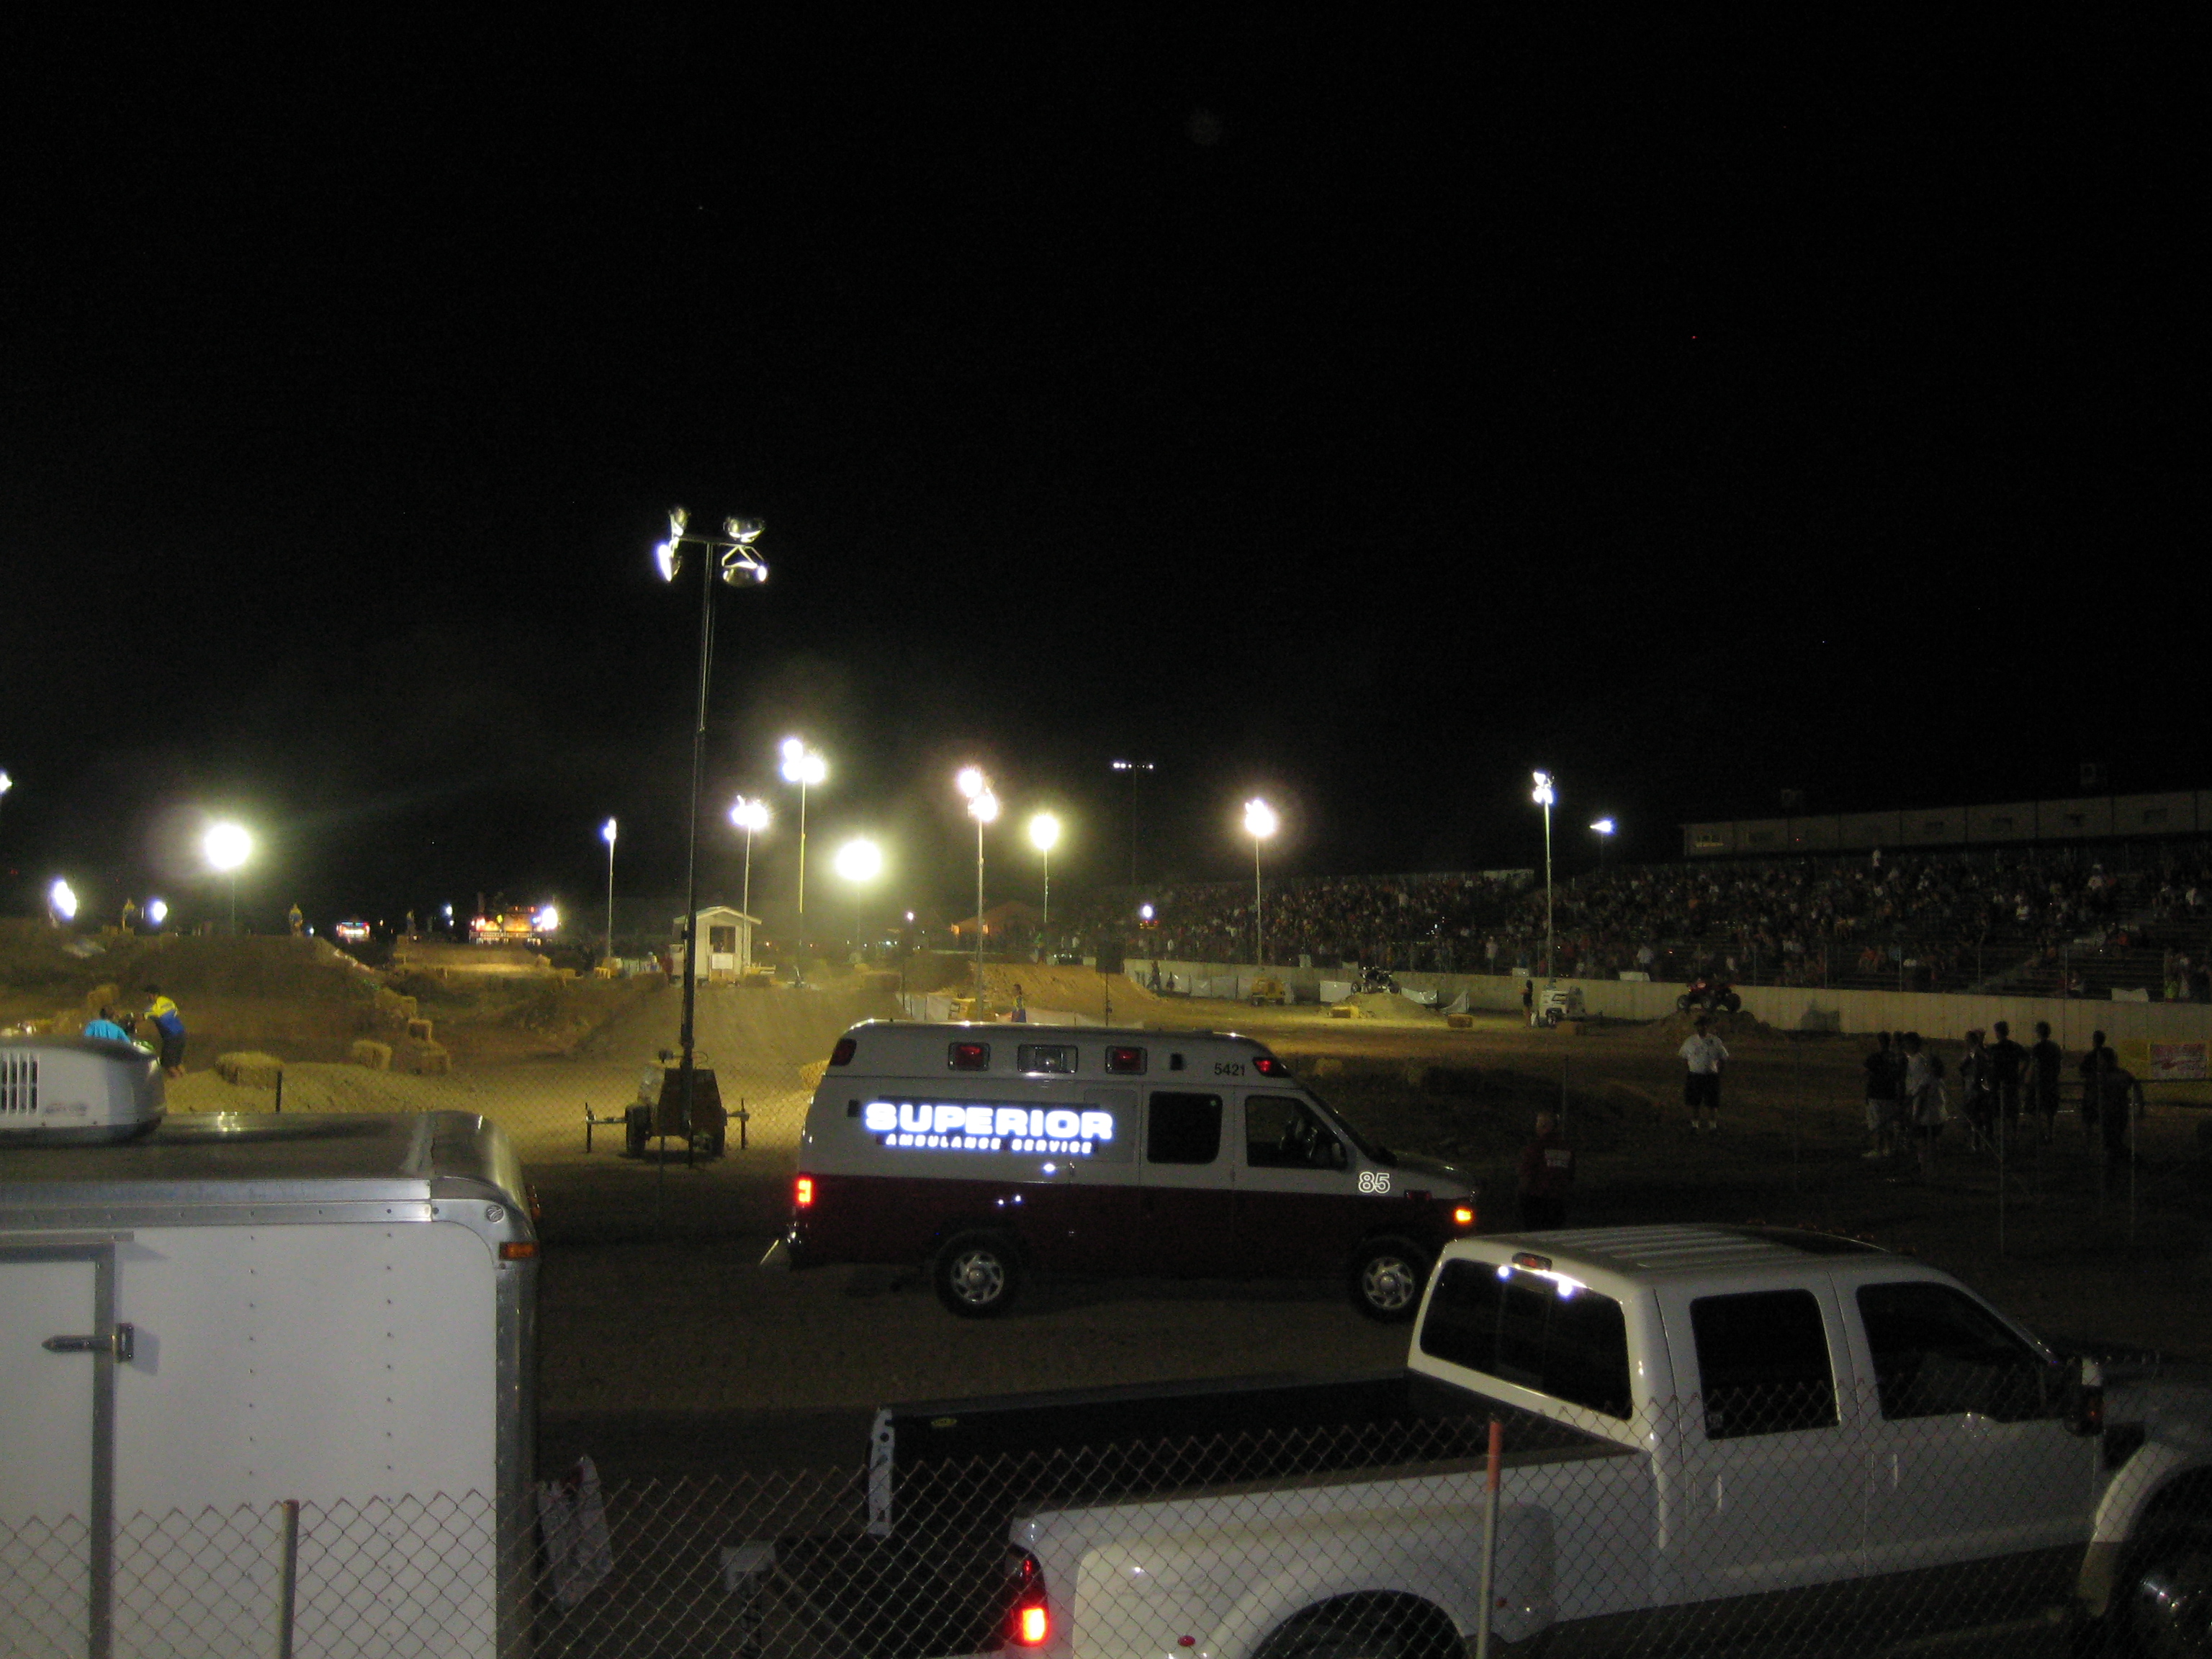 SX under the lights is excellent.